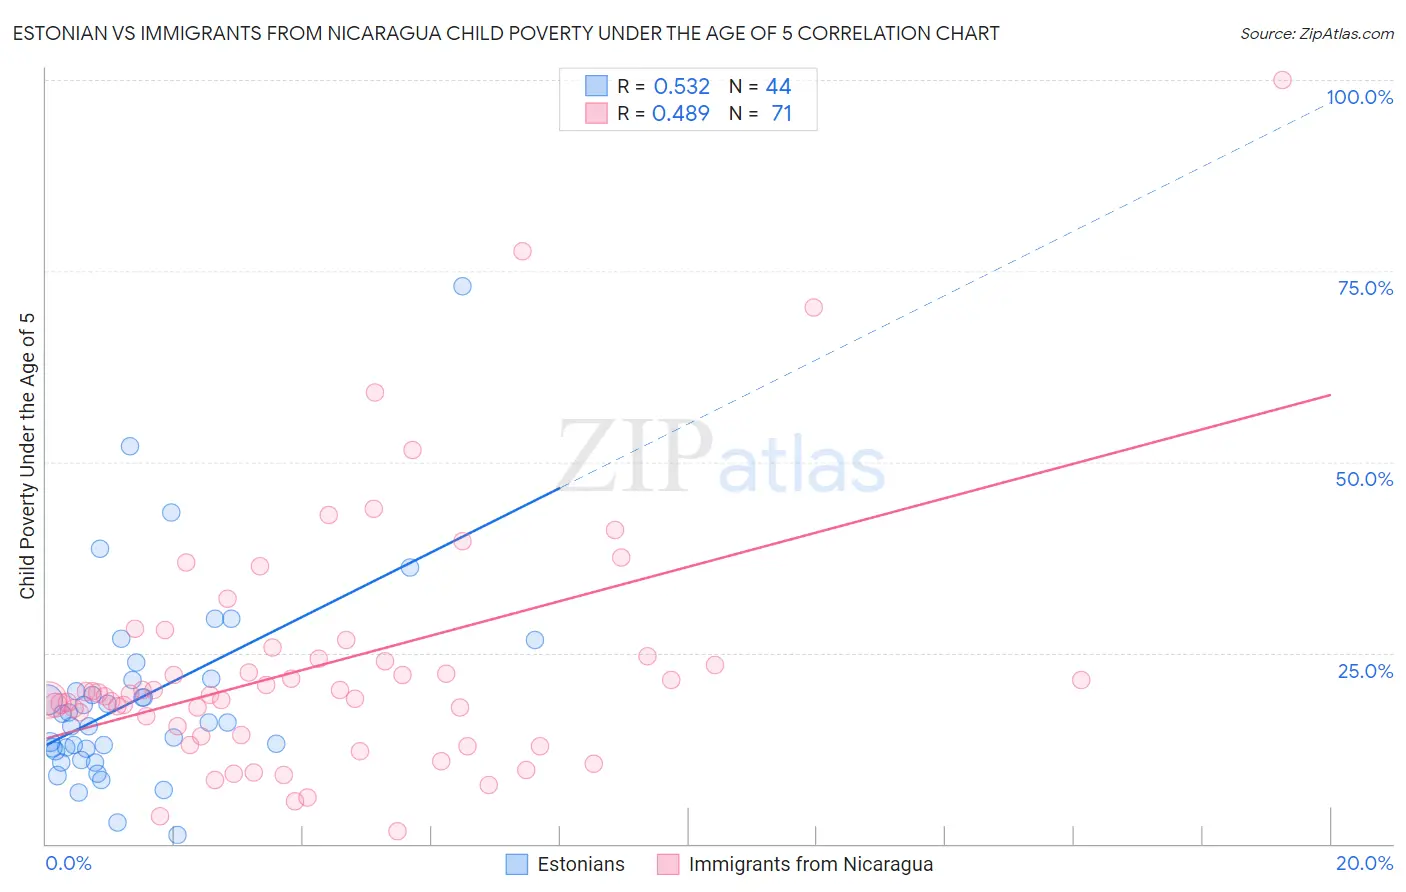 Estonian vs Immigrants from Nicaragua Child Poverty Under the Age of 5